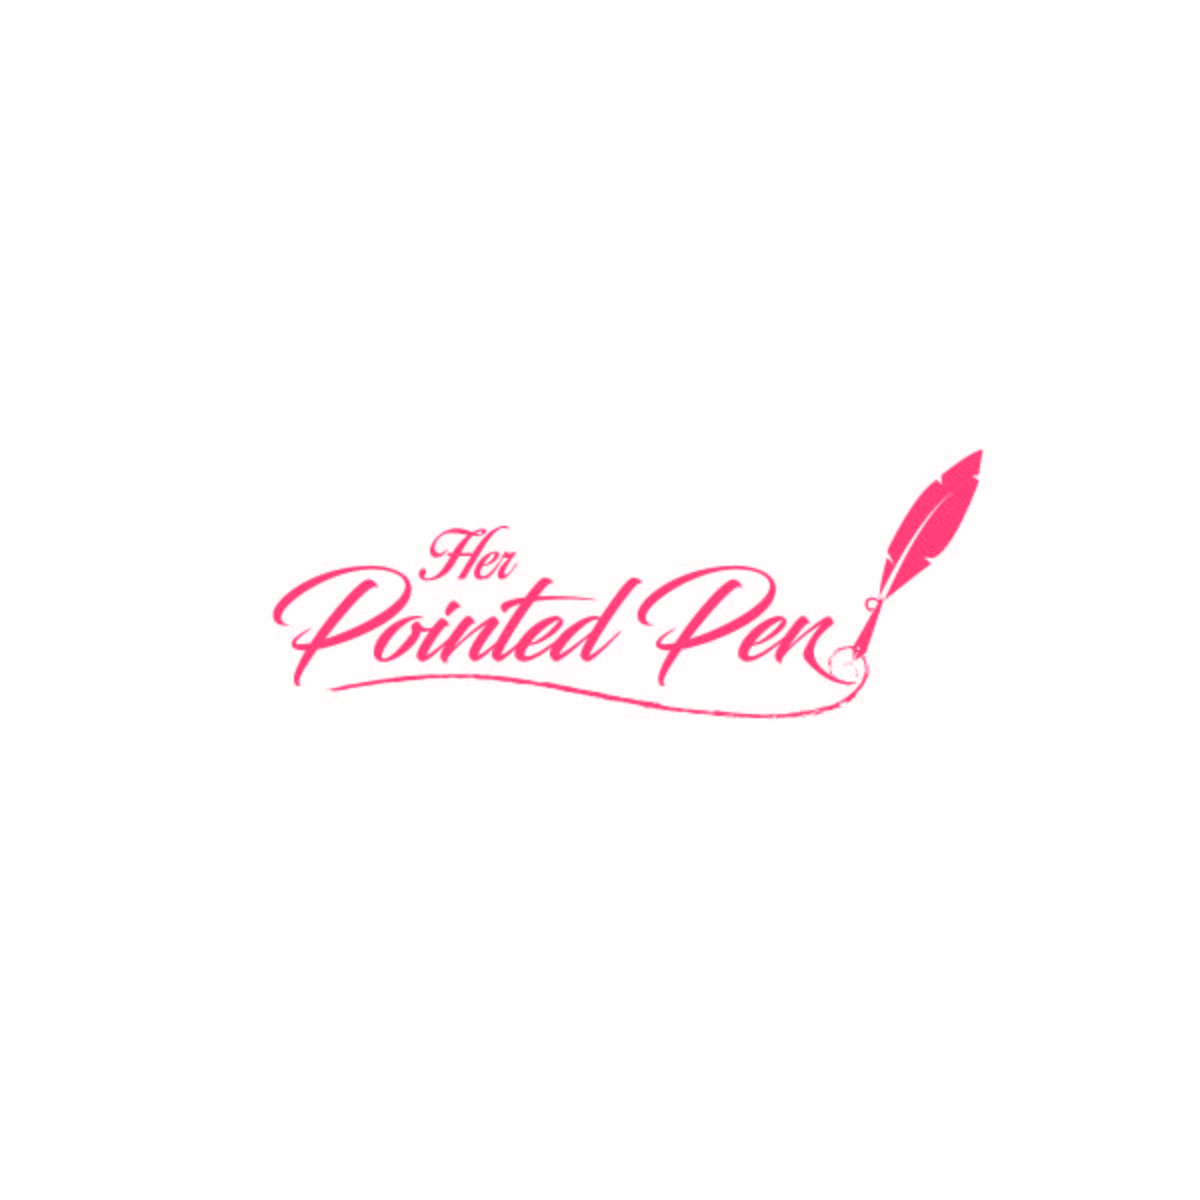 Red Pointed Logo - Elegant, Professional, Boutique Logo Design for Her Pointed Pen by ...